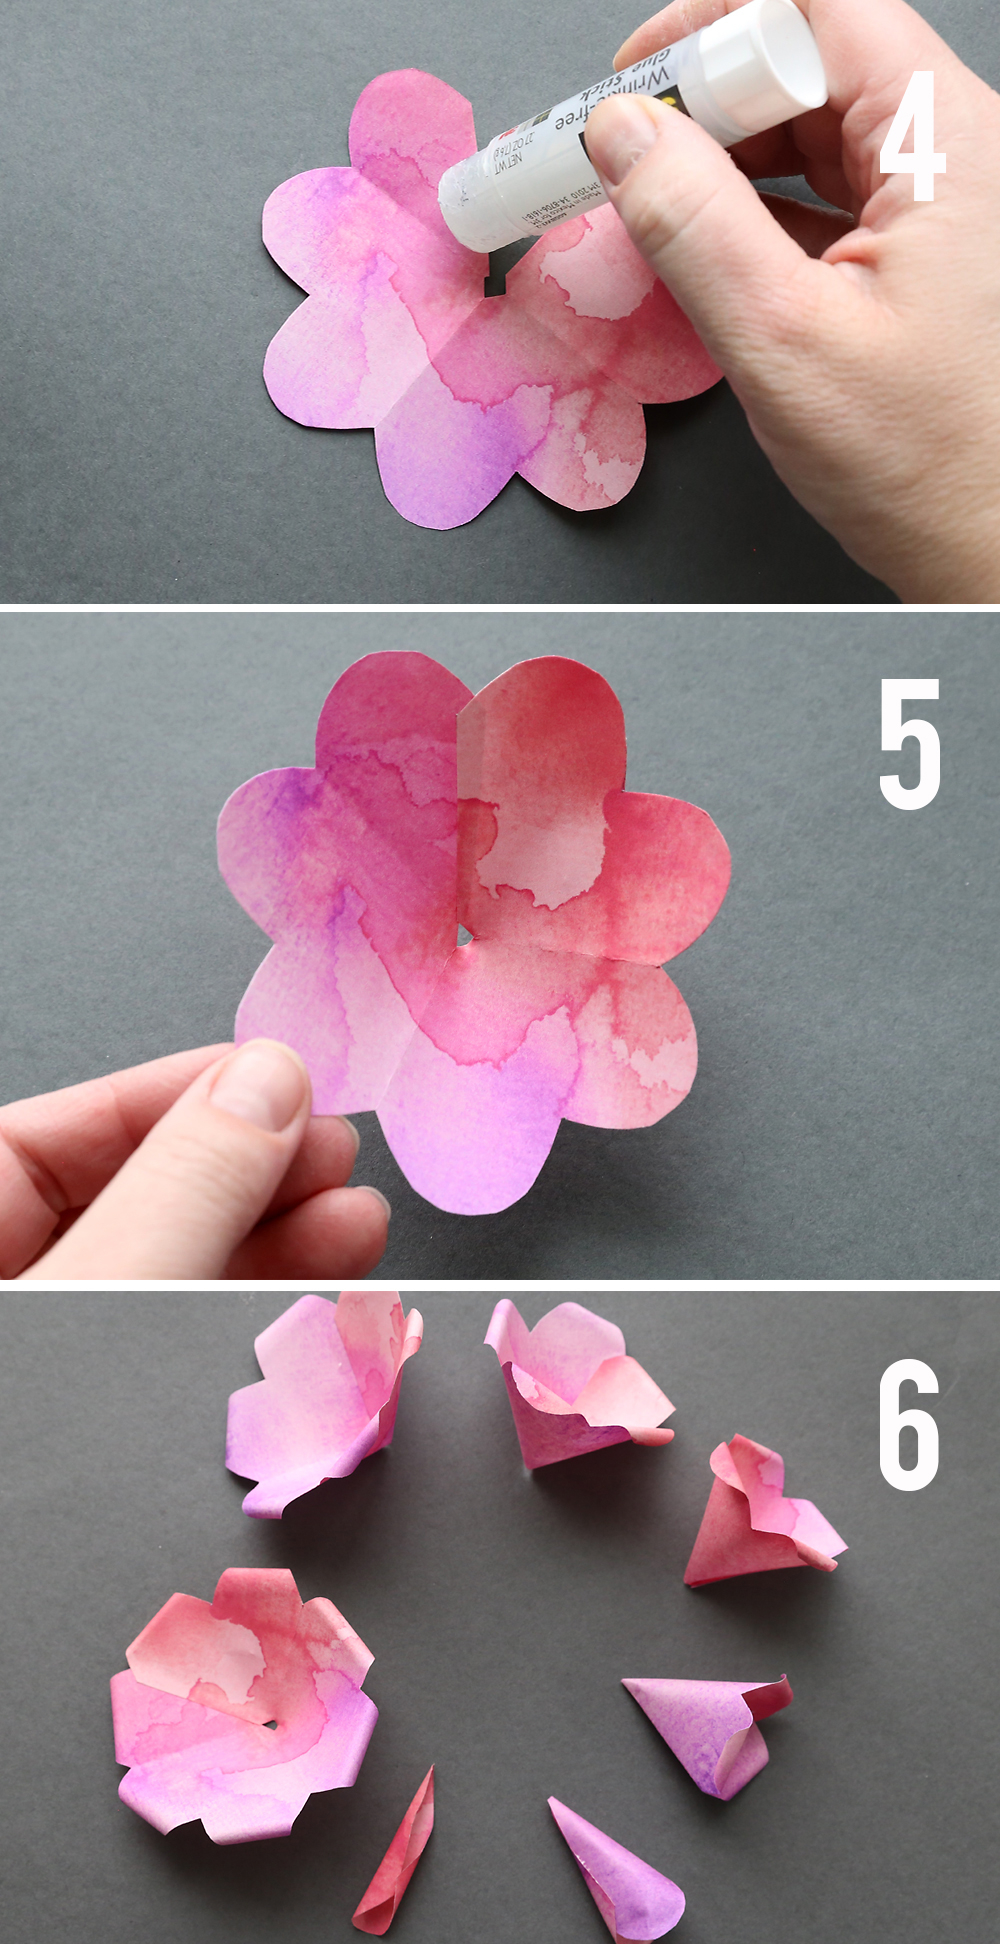 How To Do A Origami Flower Make Gorgeous Paper Roses With This Free Paper Rose Template Its